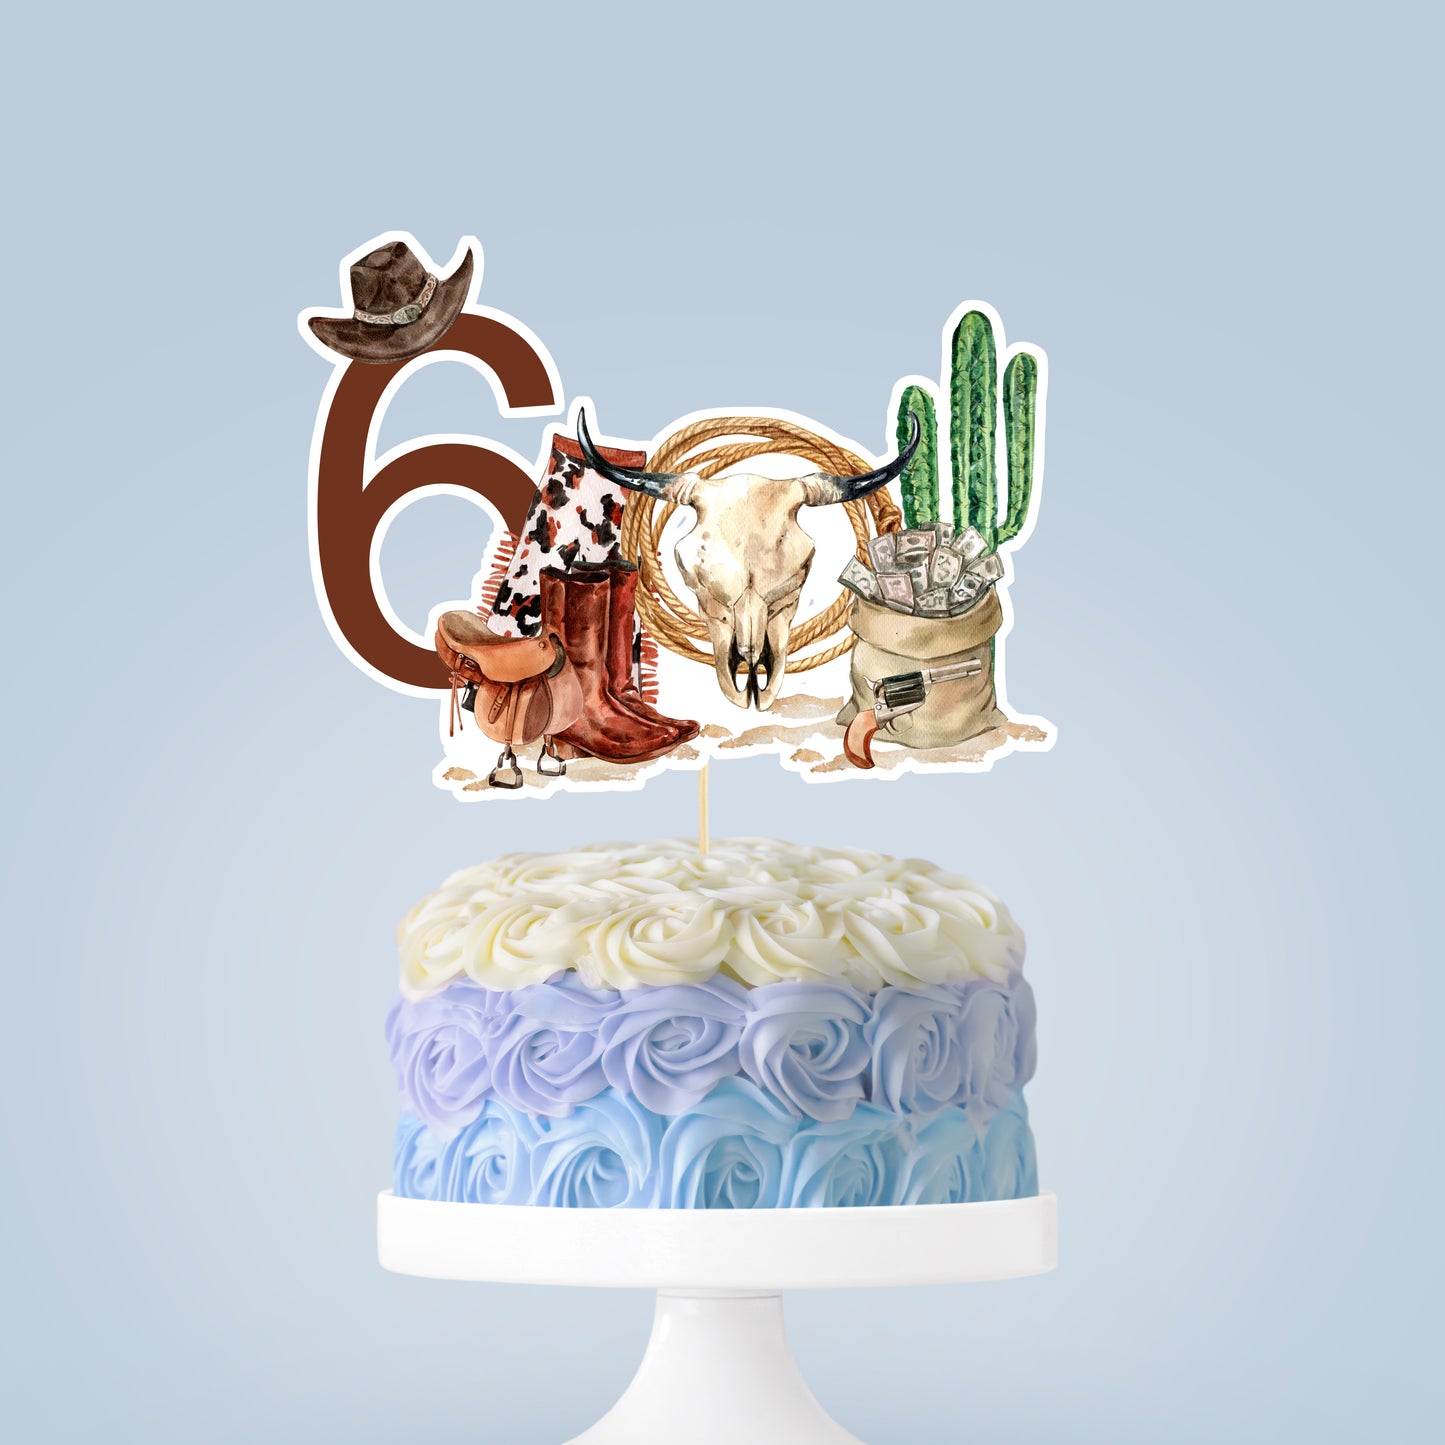 Rodeo Cake topper 6 birthday | Cowboy Party Decorations - 34A